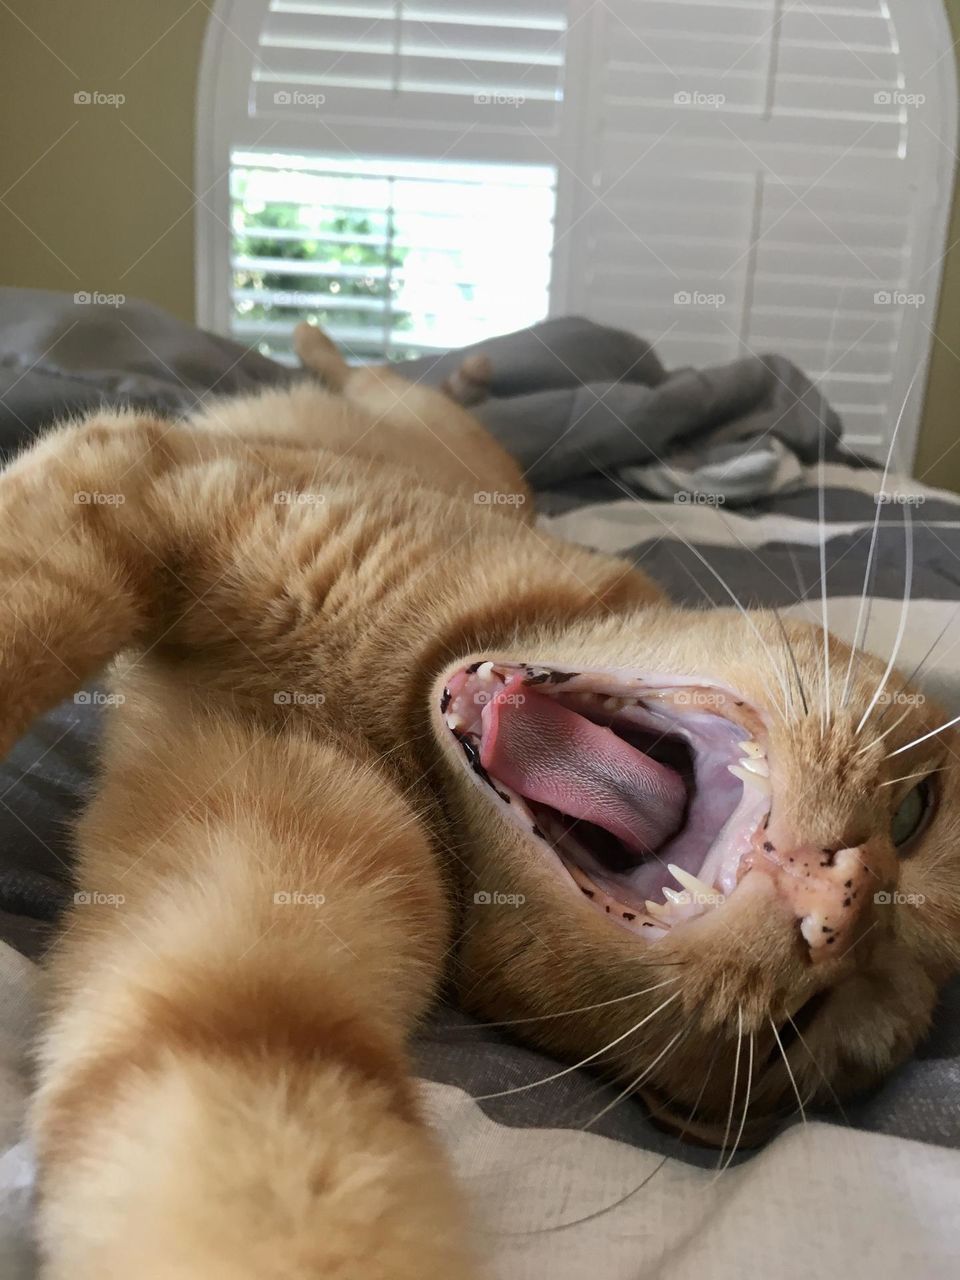 Roaring ginger kitty photography mission entry 